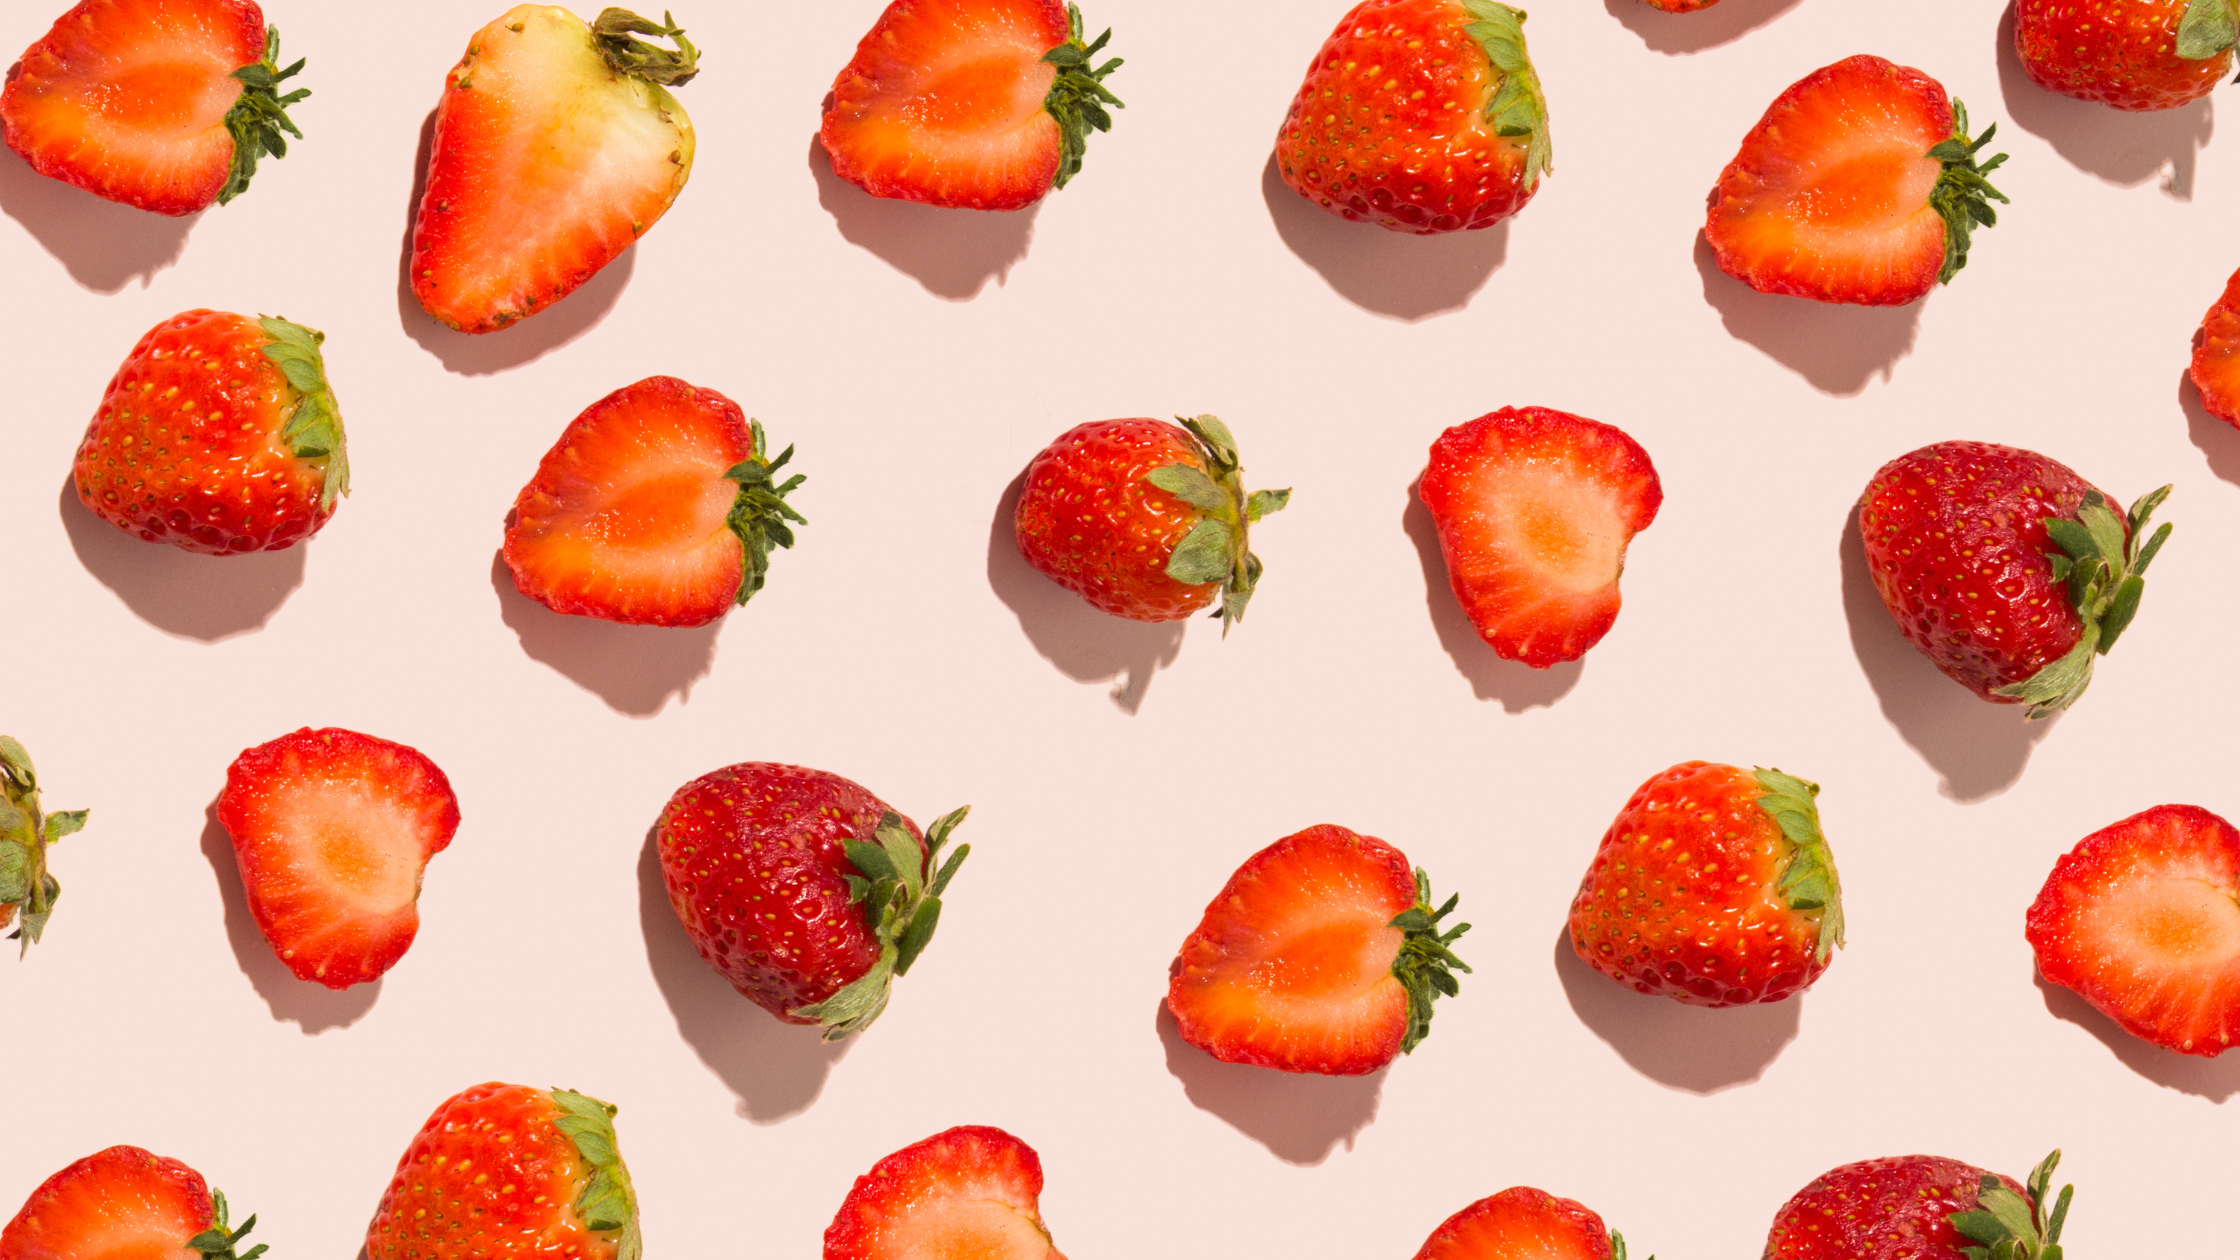 Strawberries in rows with a pink background